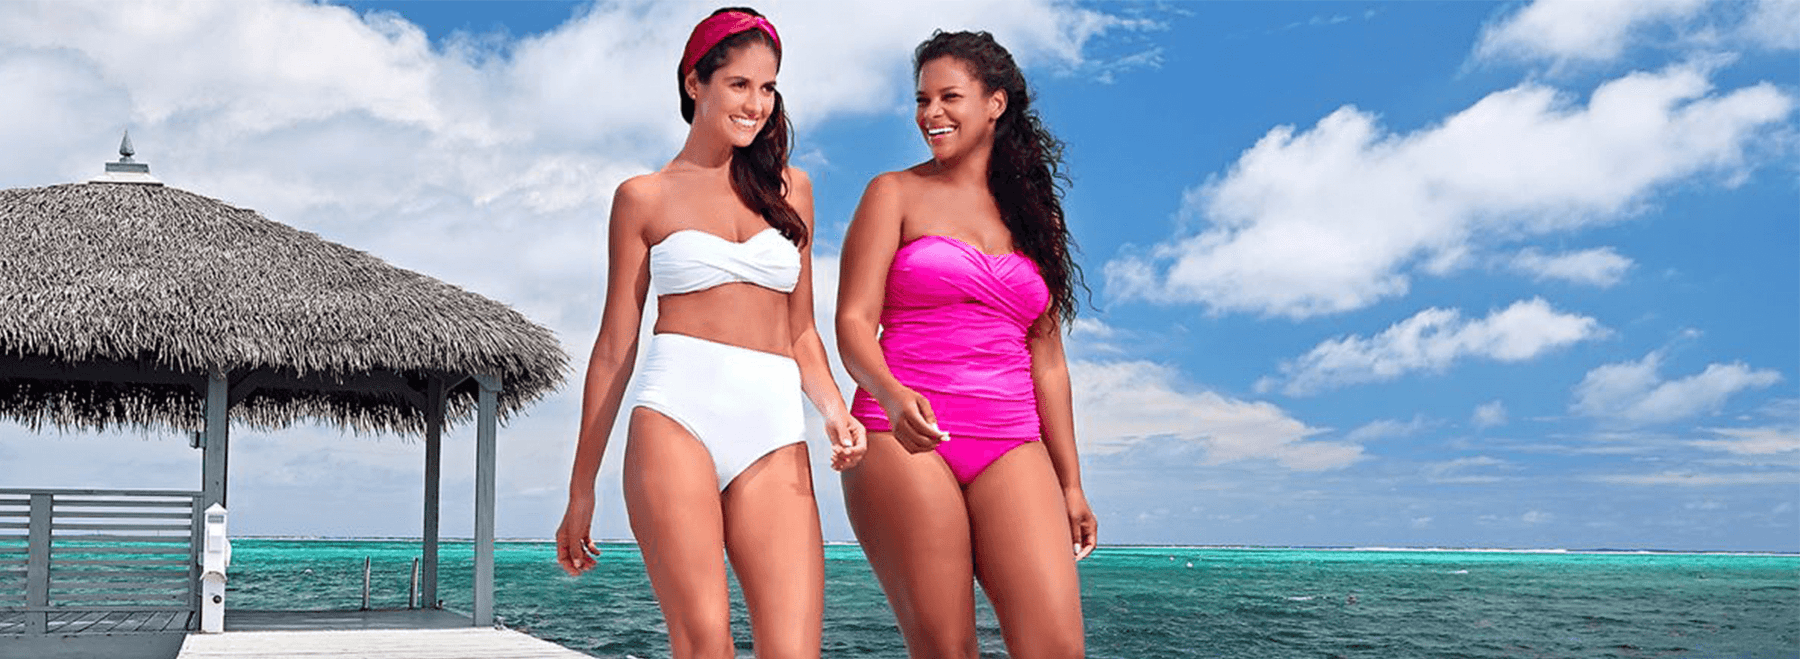 Best Bathing Suit Styles For Women With Larger Busts